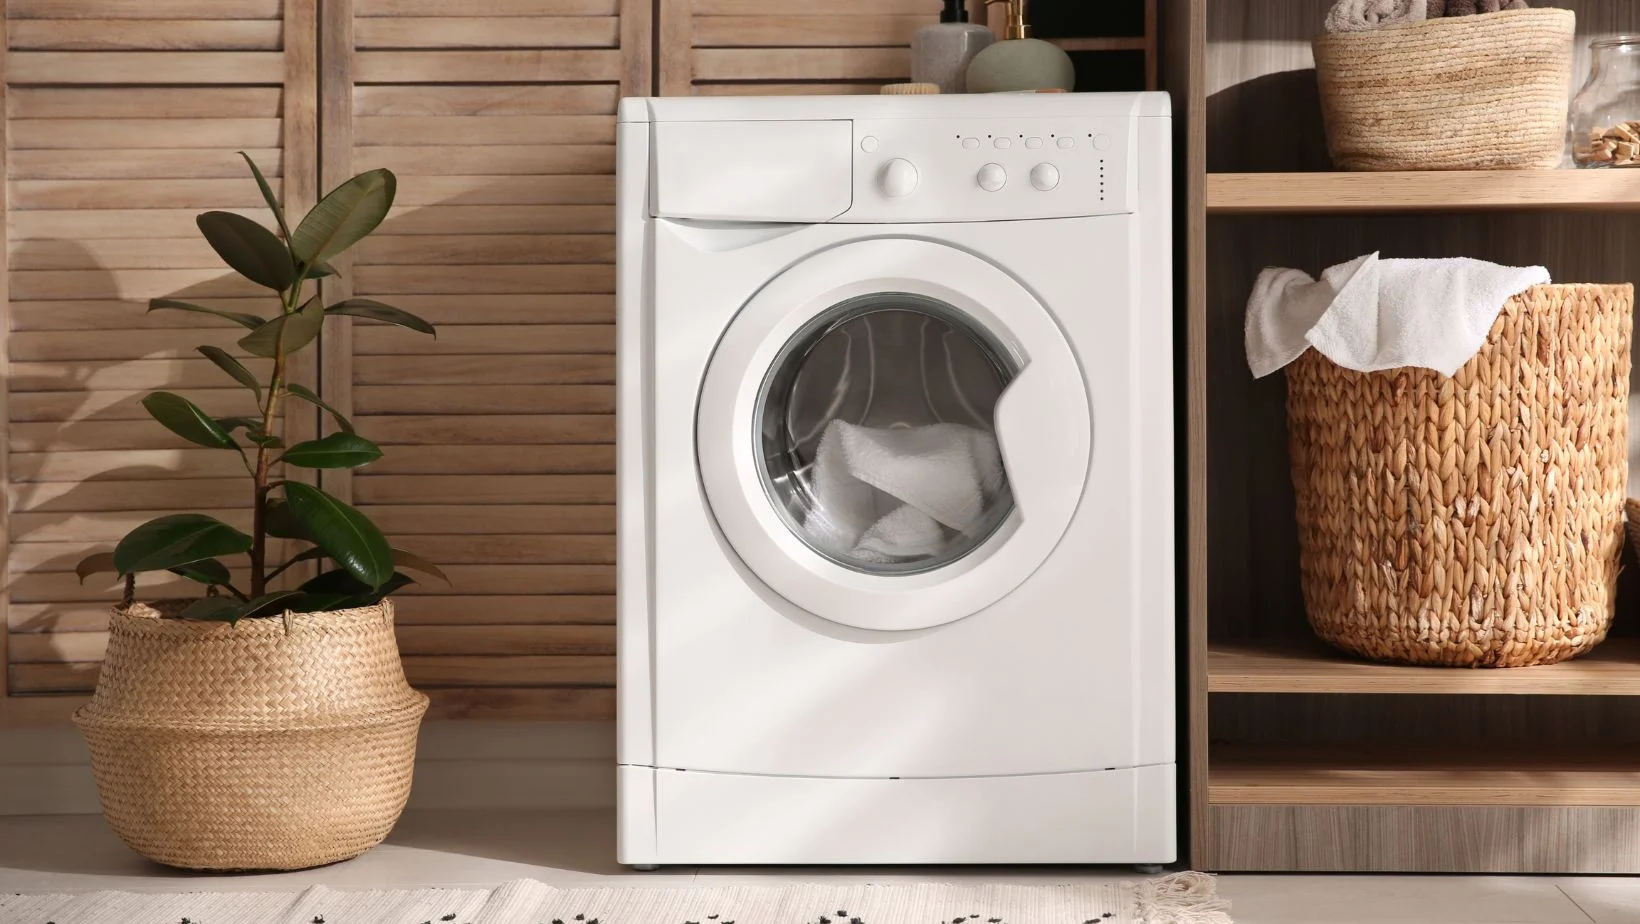 Modern Washing Machine and Shelving Unit in Laundry Room Interior